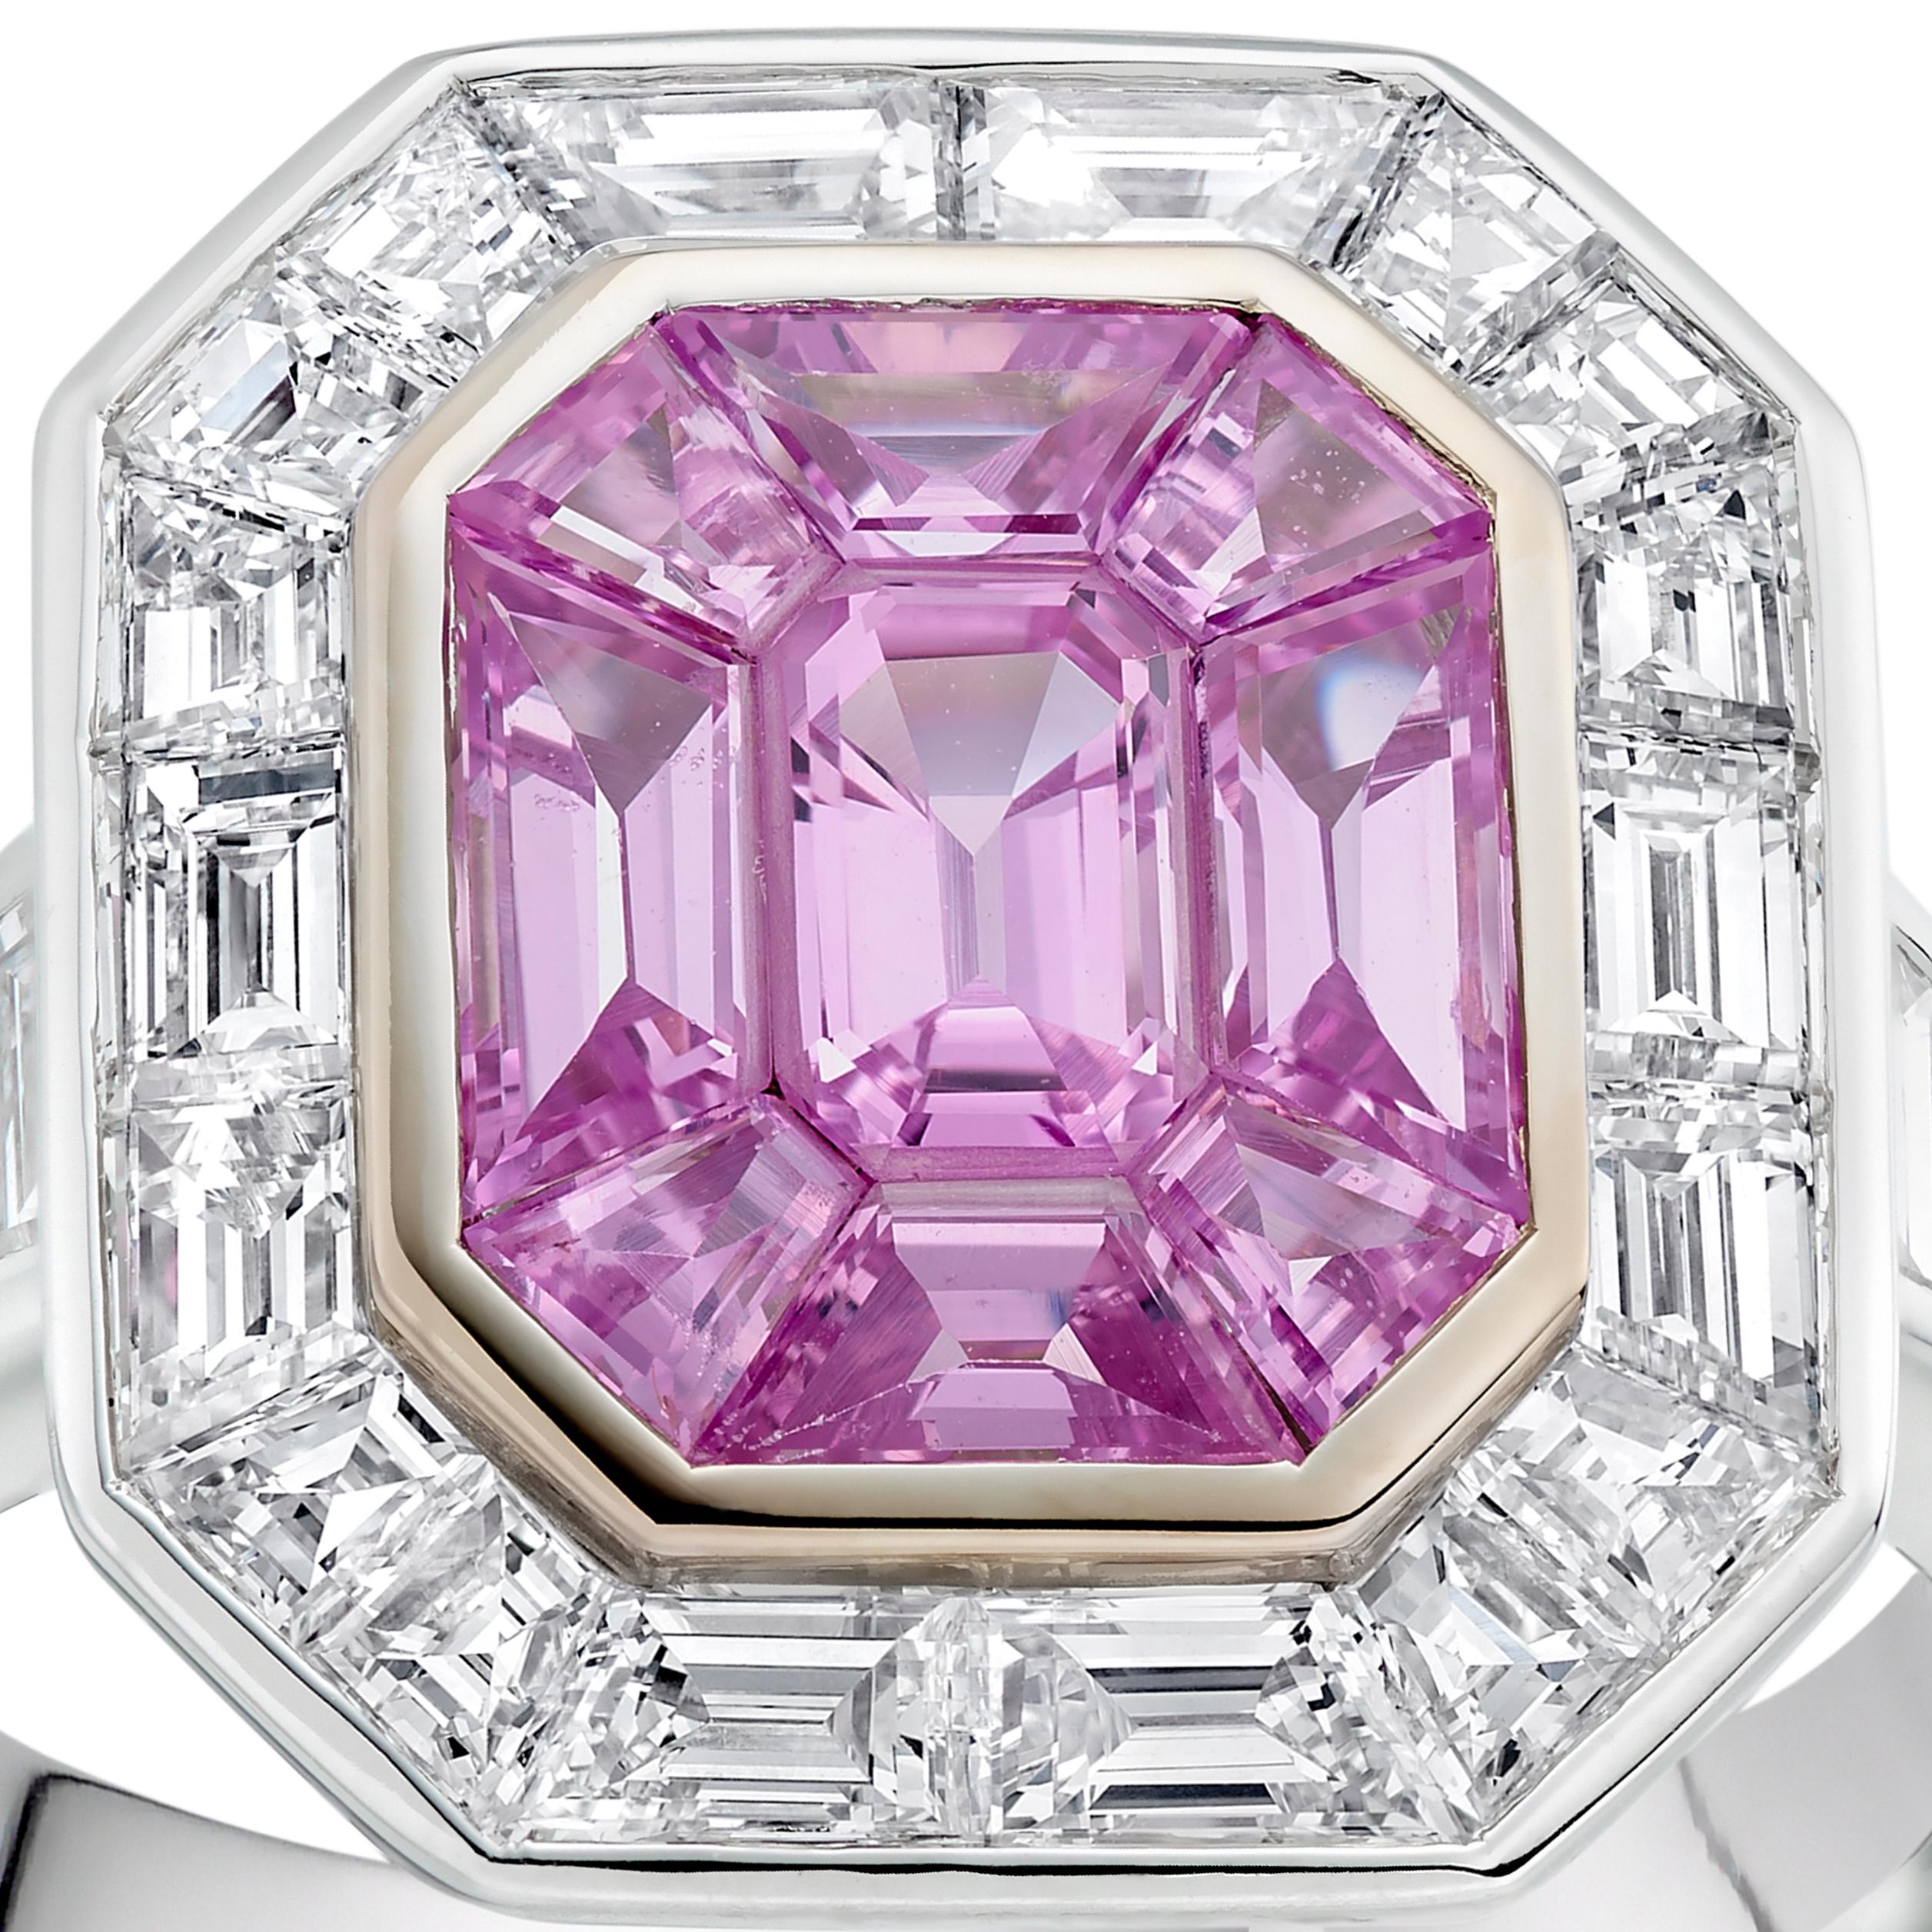 This beautiful pink sapphire cluster ring features 9 vivid pink sapphires weighing approximately 3.45 carats in total, surrounded by a pretty halo of diamonds with further diamonds on the band. The total diamond weight is approximately 1.79 carats.